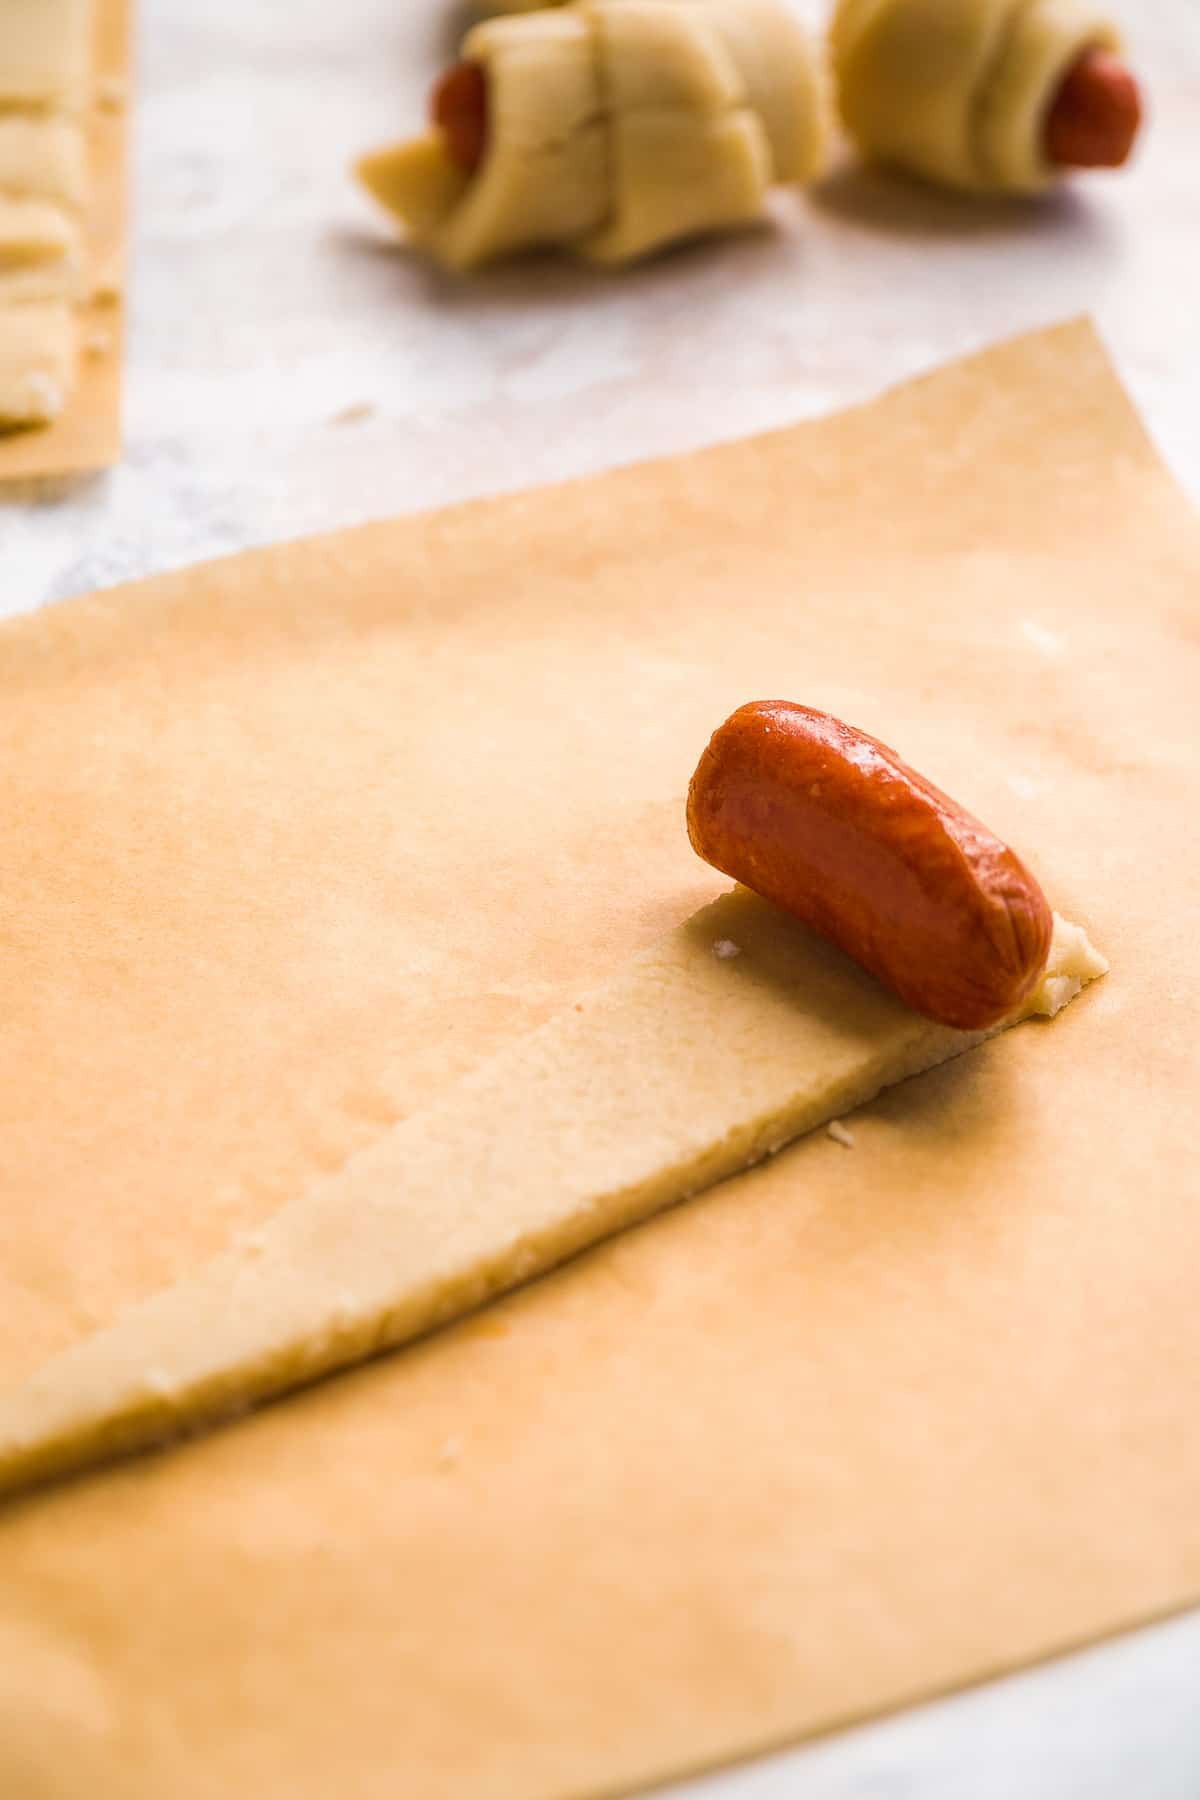 Triangular piece of dough with a sausage on top about to be rolled up.